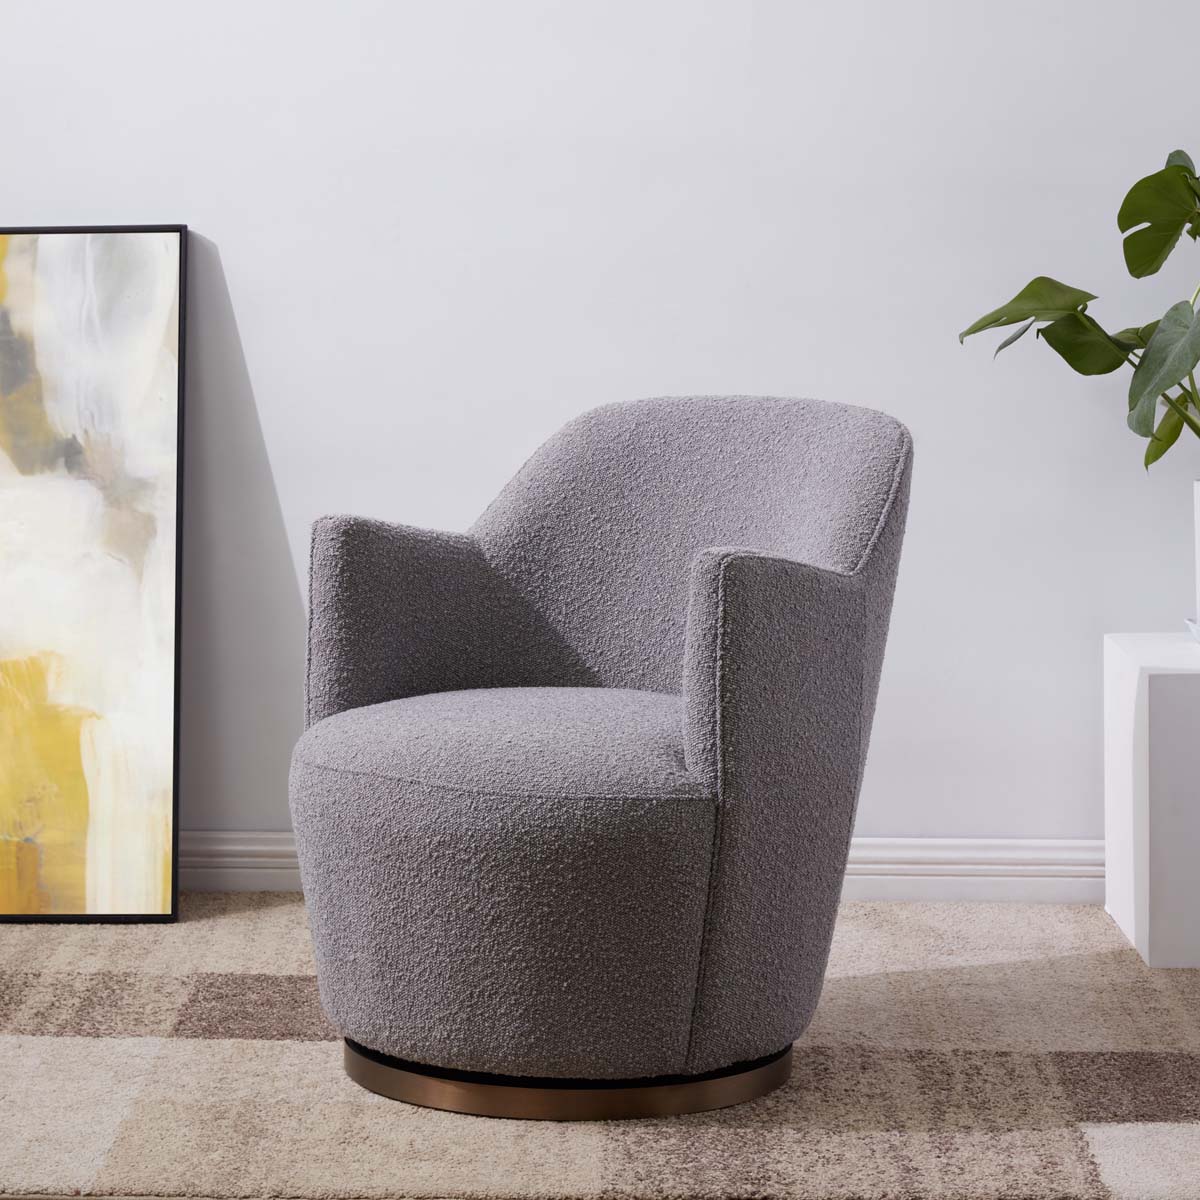 Safavieh Couture Christian Boucle Swivel Accent Chair - Light Grey